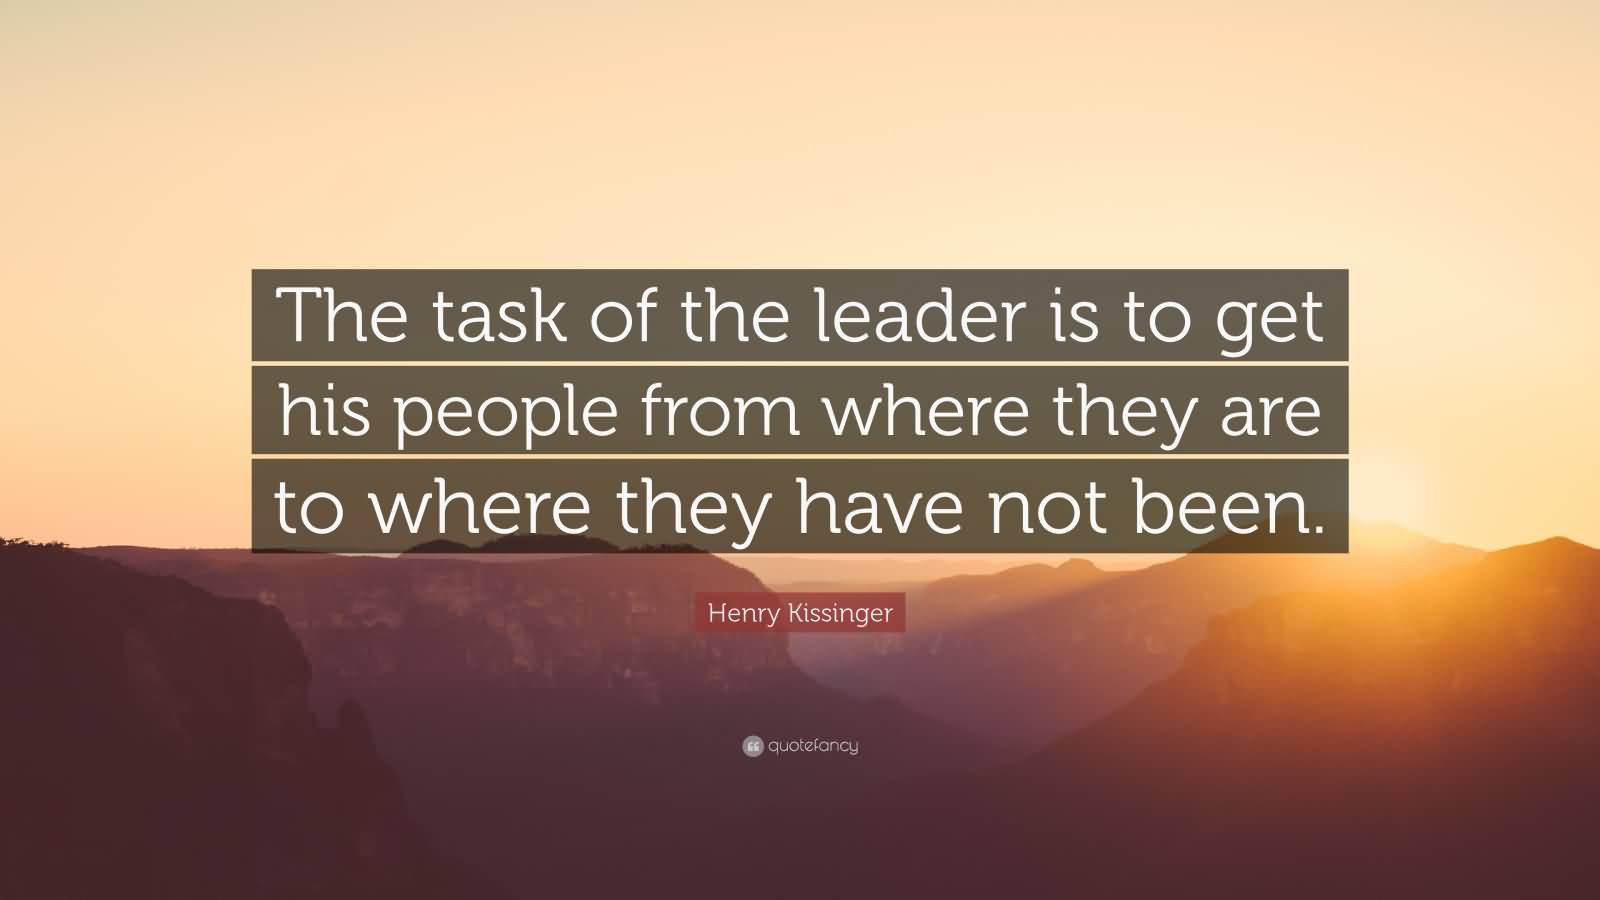 The task of the leader is to get his people from where they are to where they have not been - Henry A. Kissinger